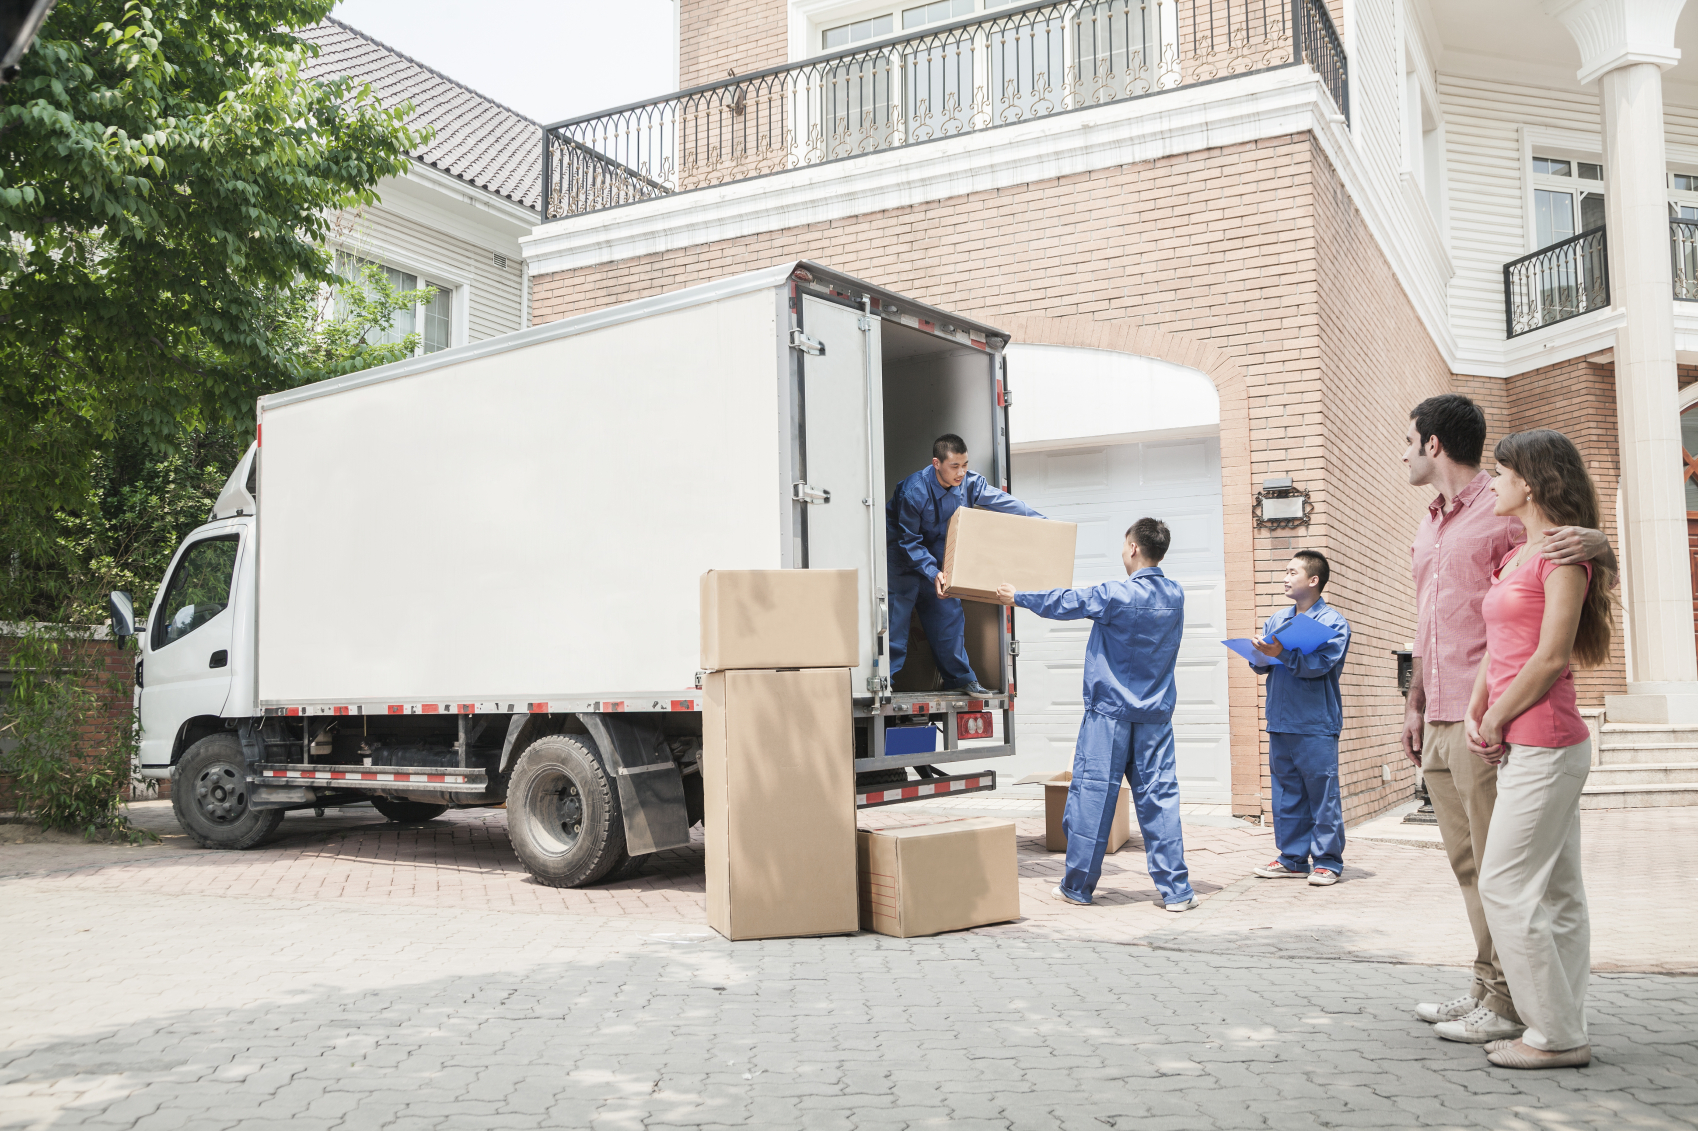 Find A Good Moving Company